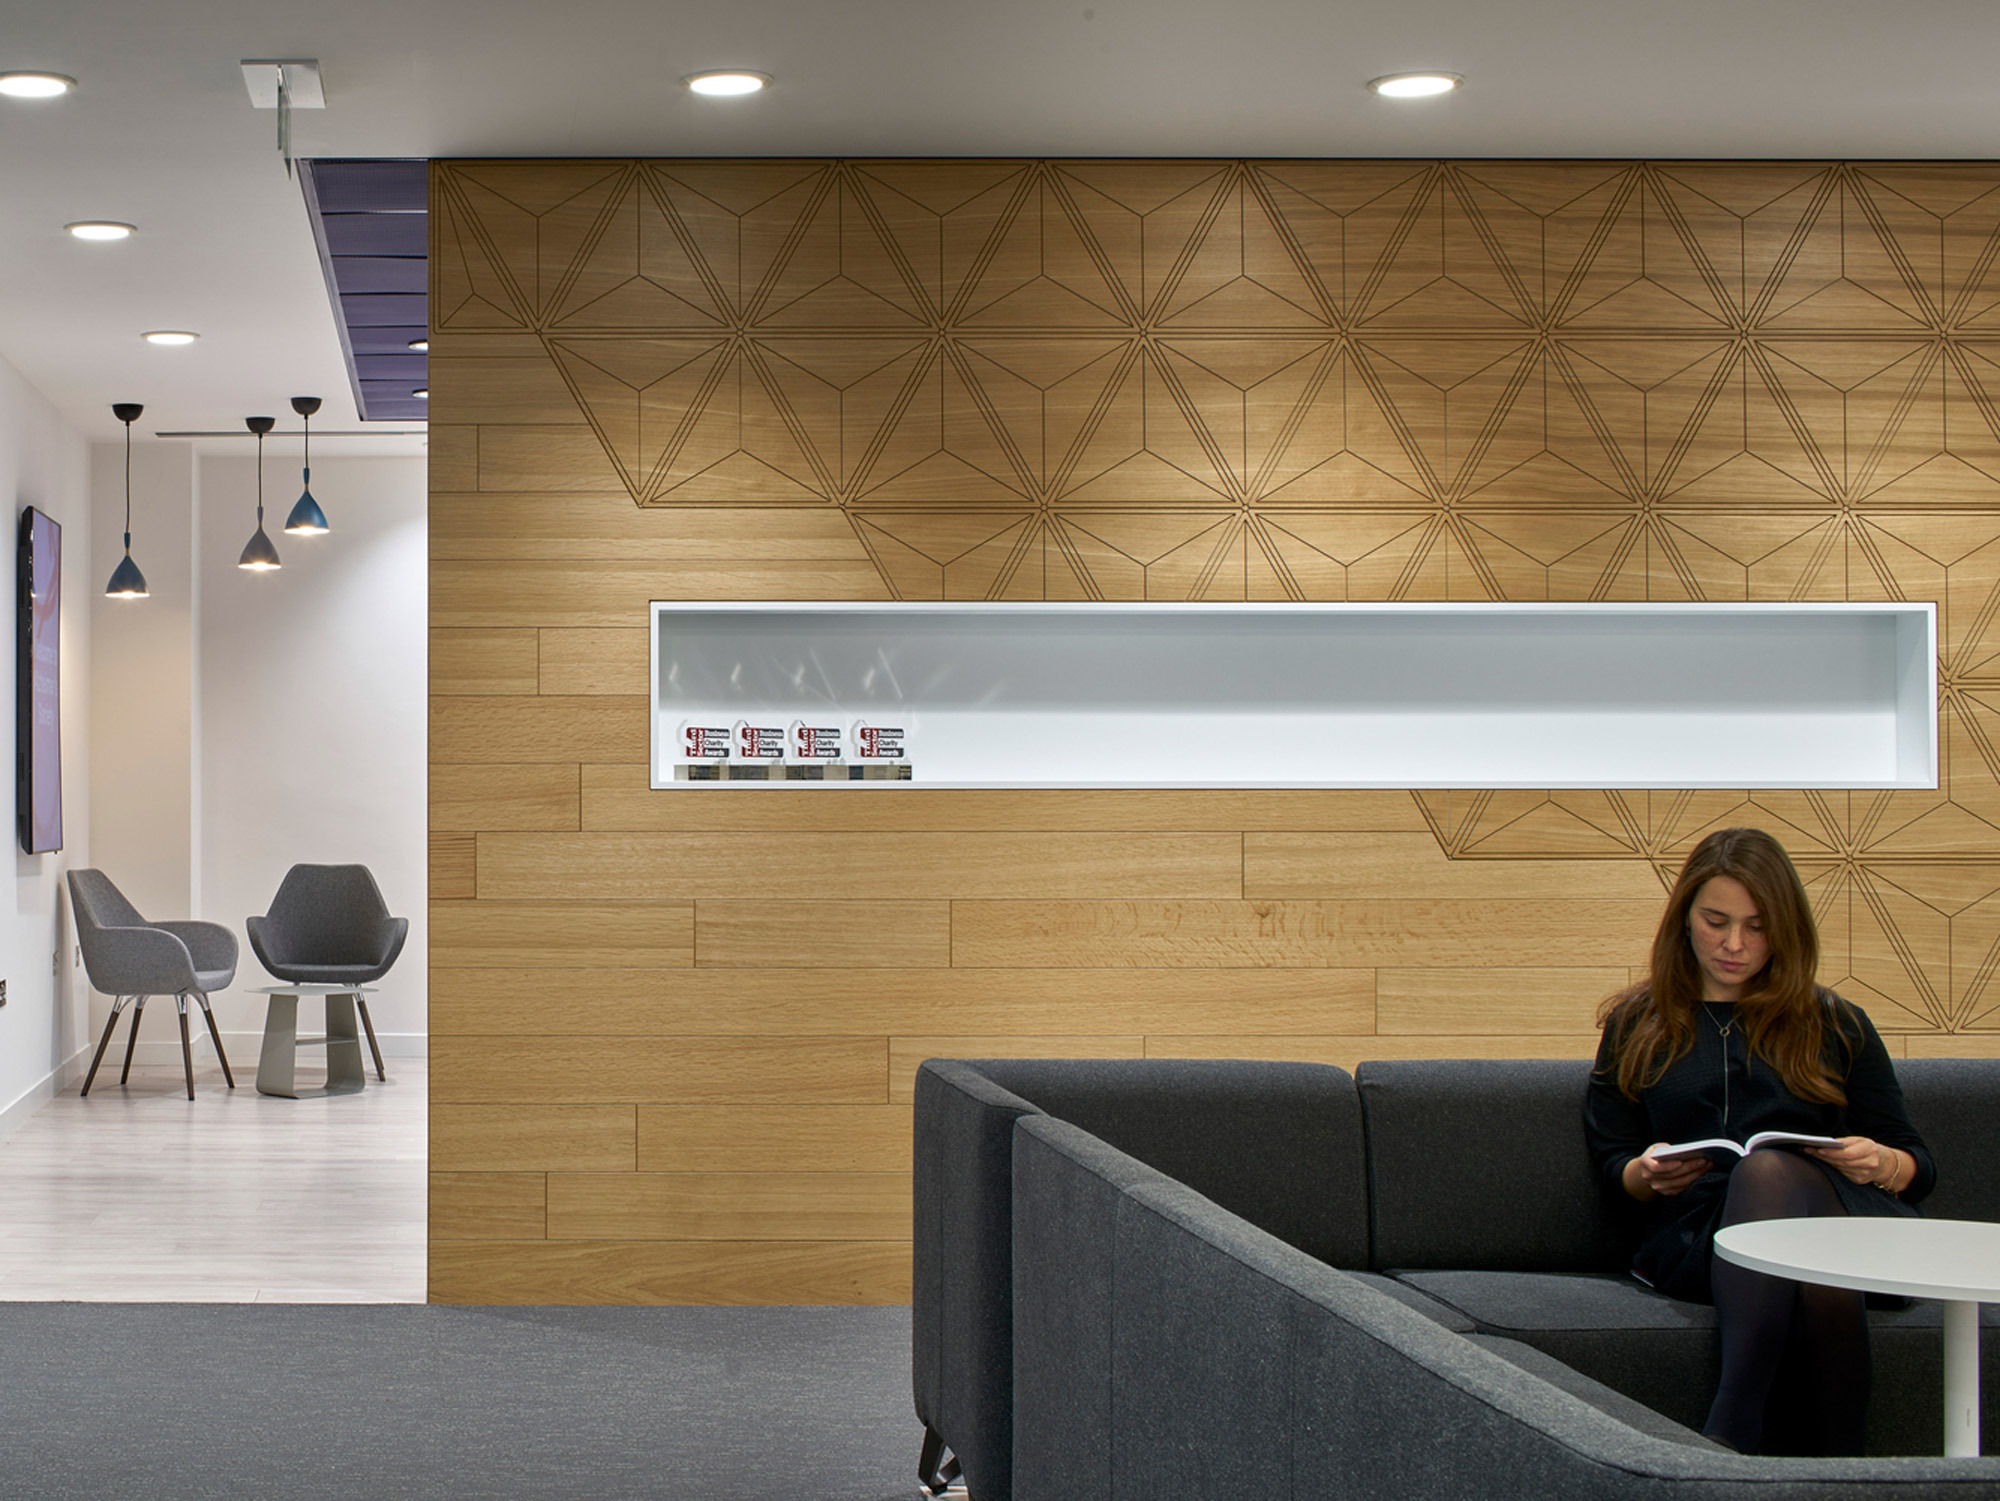 Modern office reception area featuring a geometric wood panel wall, minimalist pendant lighting, and a comfortable seating arrangement with a woman leisurely reading a magazine.